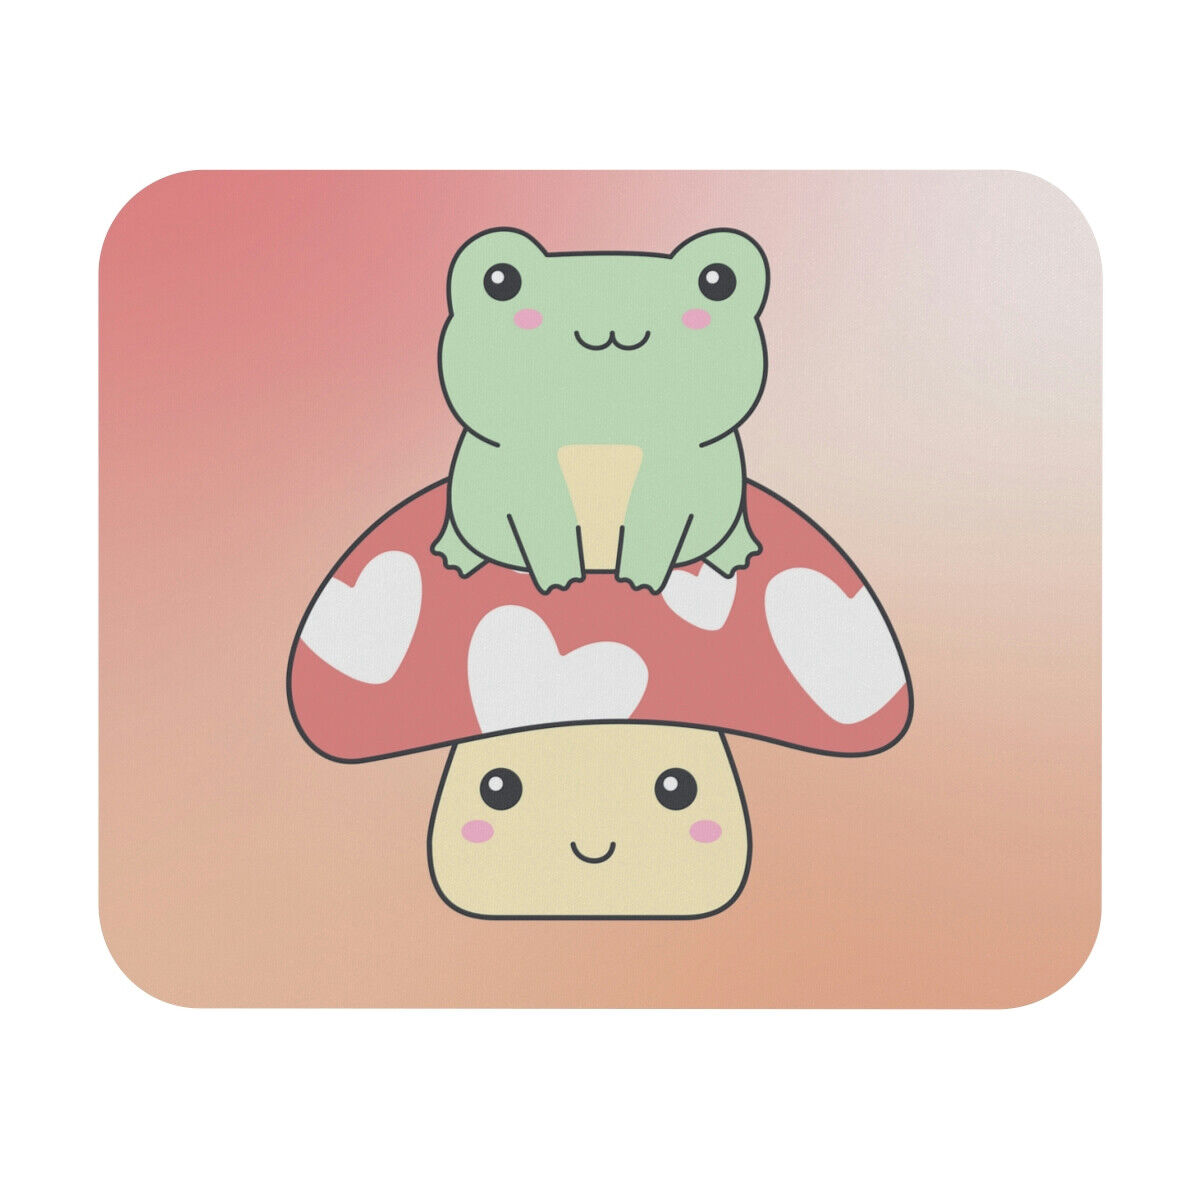 chan shuyi recommends cute anime frog pic